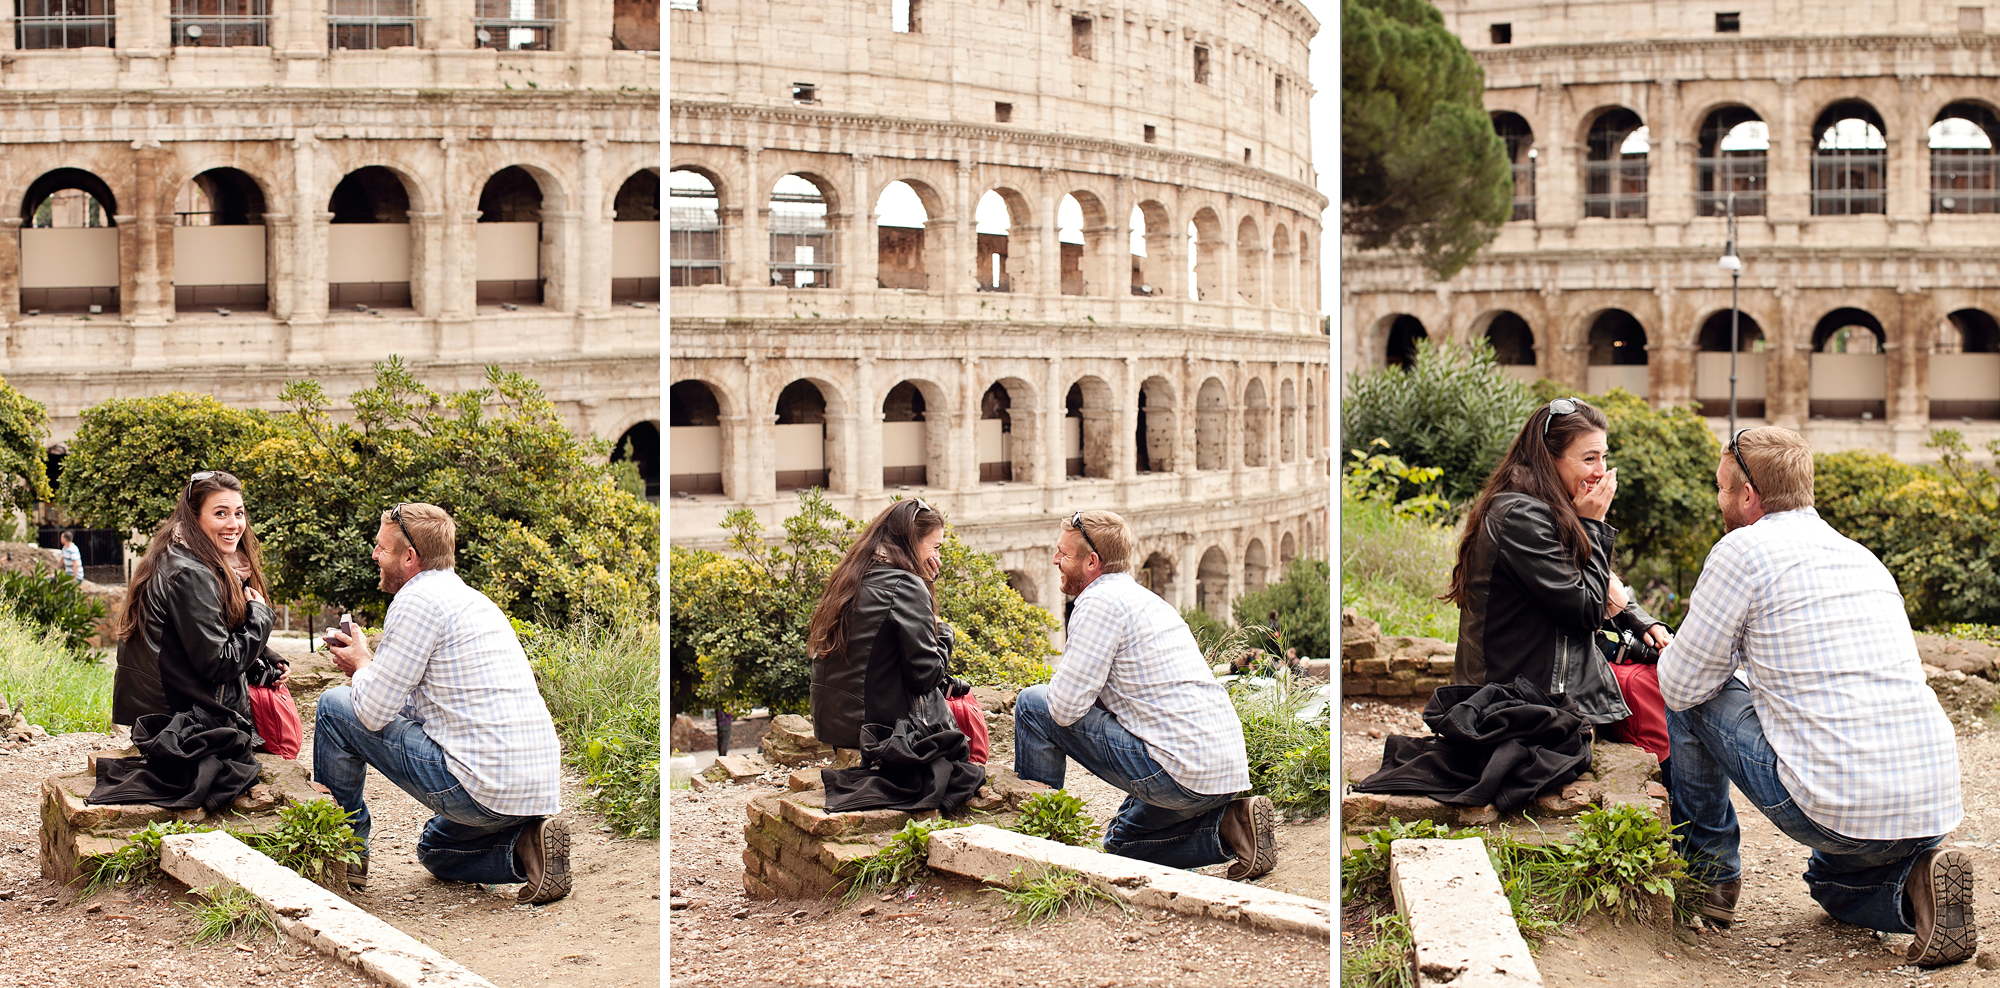 Honeymoon, vacation, family, engagement, maternity, wedding, love story individual and solo photoshoots in Rome, Italy by photographer Tricia Anne Photography | Rome Photographer, Colosseum Surprise Proposal, Rome Engagement Photographer, colosseum photo shoot in rome, Rome Vacation Photographer, Rome Family Photographer, English speaking photographer in Rome